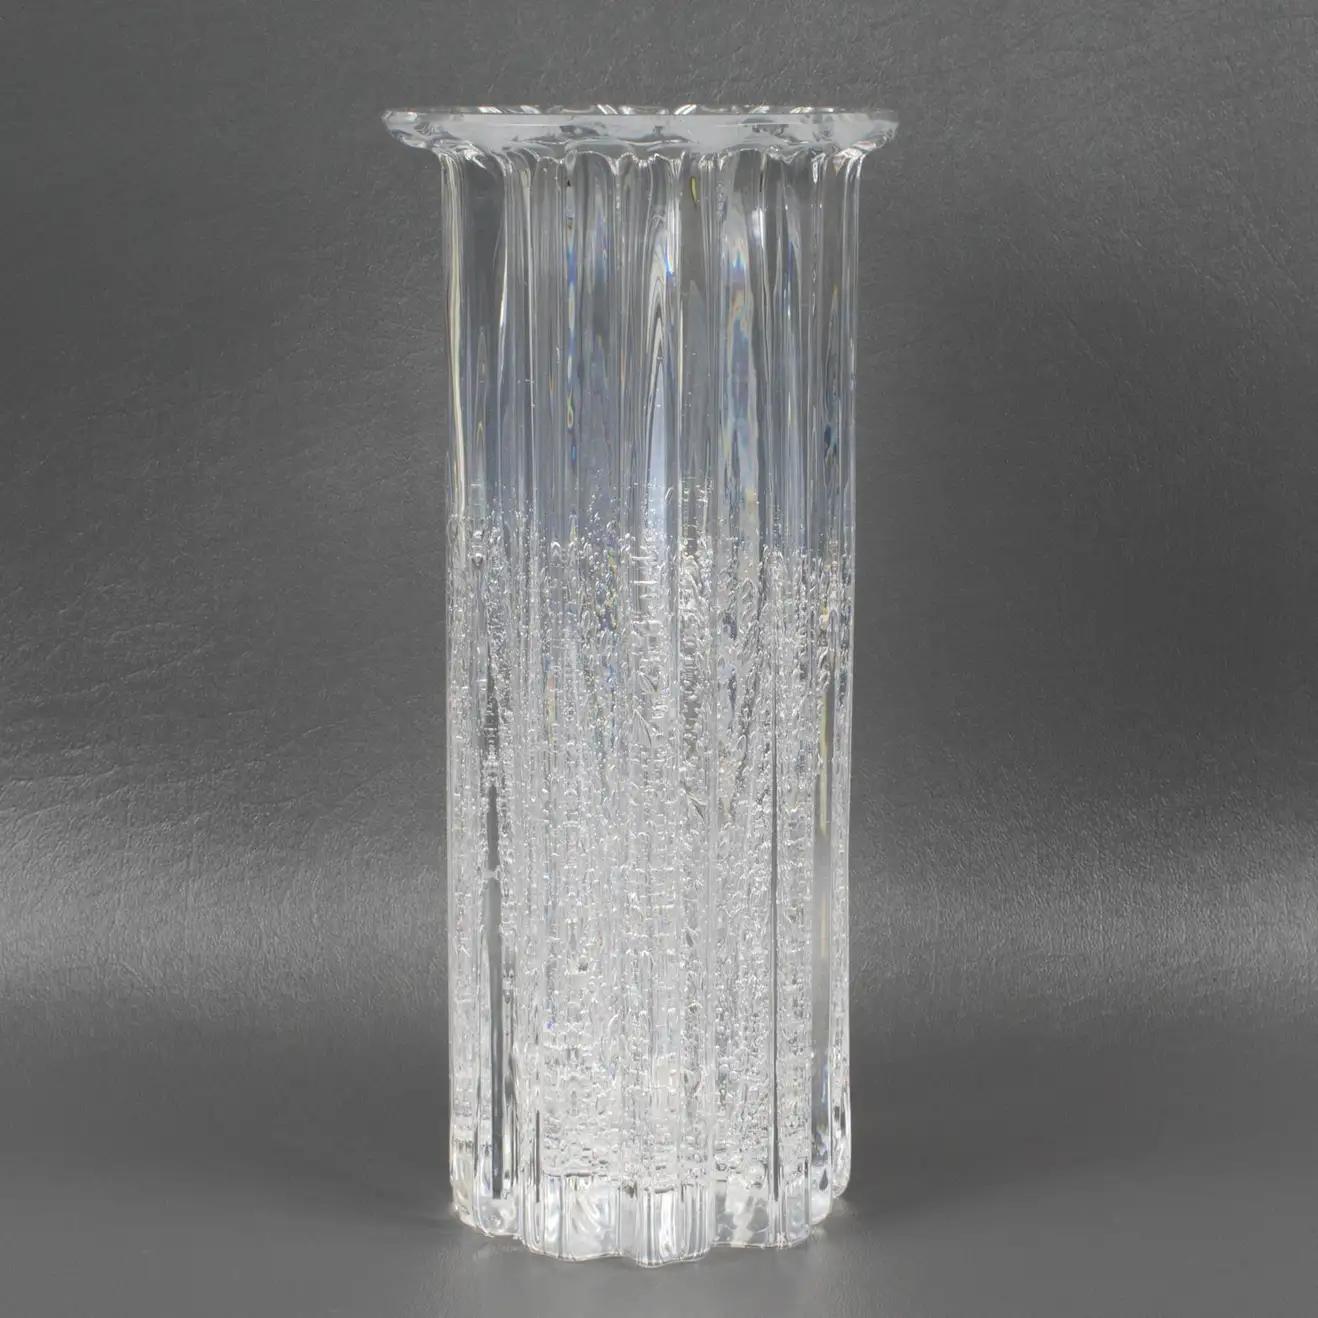 This beautiful art glass vase was designed by Willy Johansson (1921 - 1993) for Hadeland Glassverk, Norway. It is smooth to the touch, but the appearance looks heavily textured with ribs and bubbles trapped in glass. From the Atlantic series, this